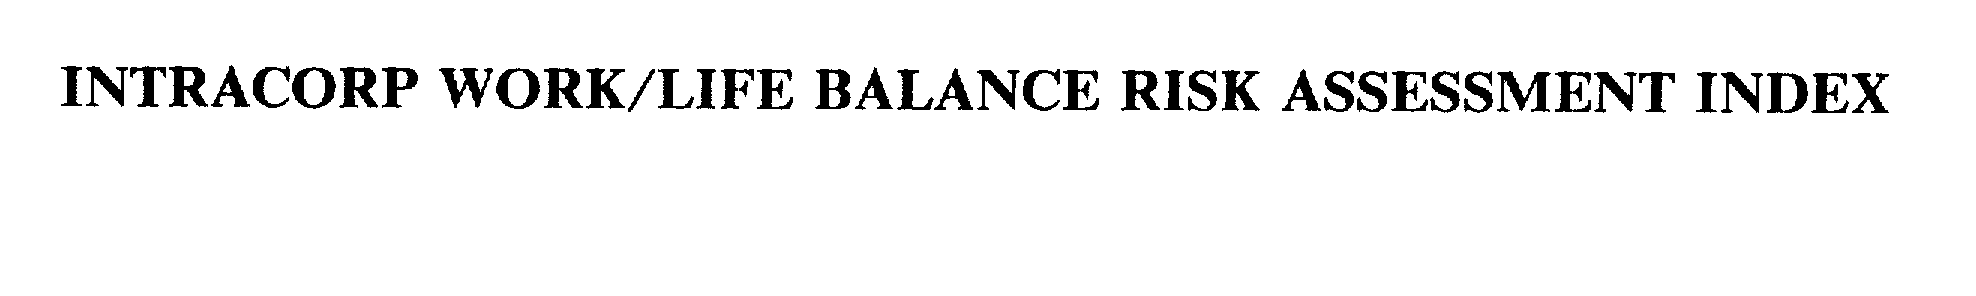  INTRACORP WORK/LIFE BALANCE RISK ASSESSMENT INDEX